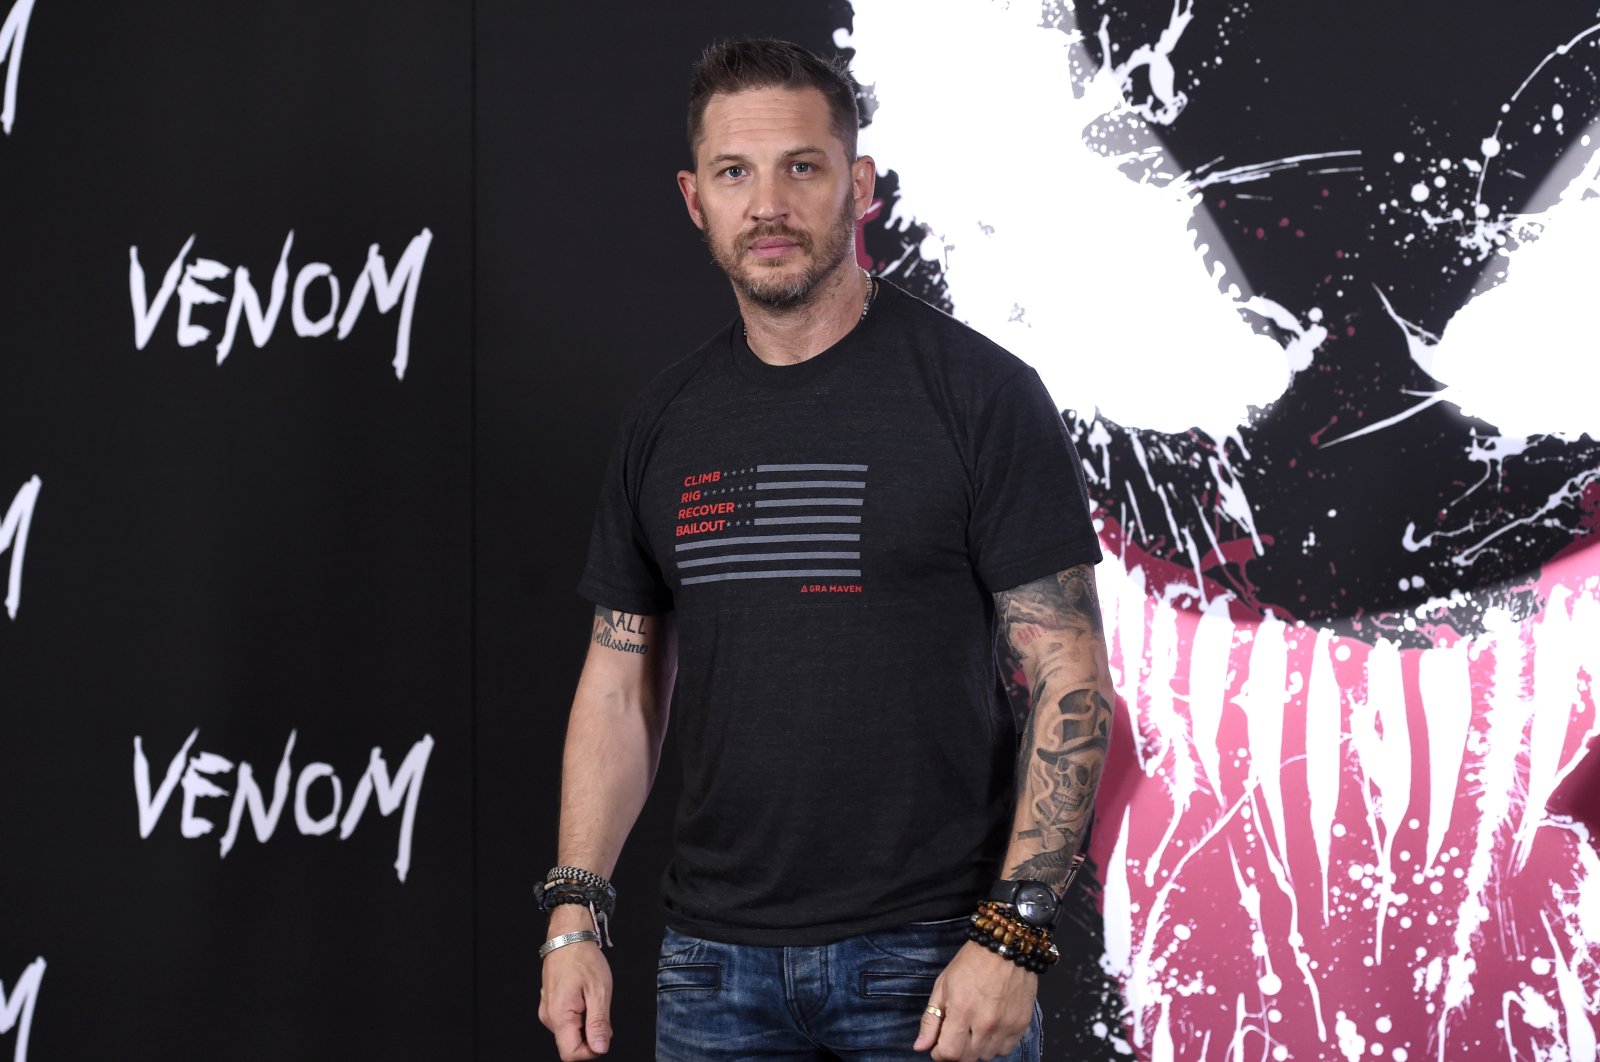 Tom Hardy attends a photo call for "Venom" on Sept. 27, 2018, in Los Angeles. (AP Photo) 